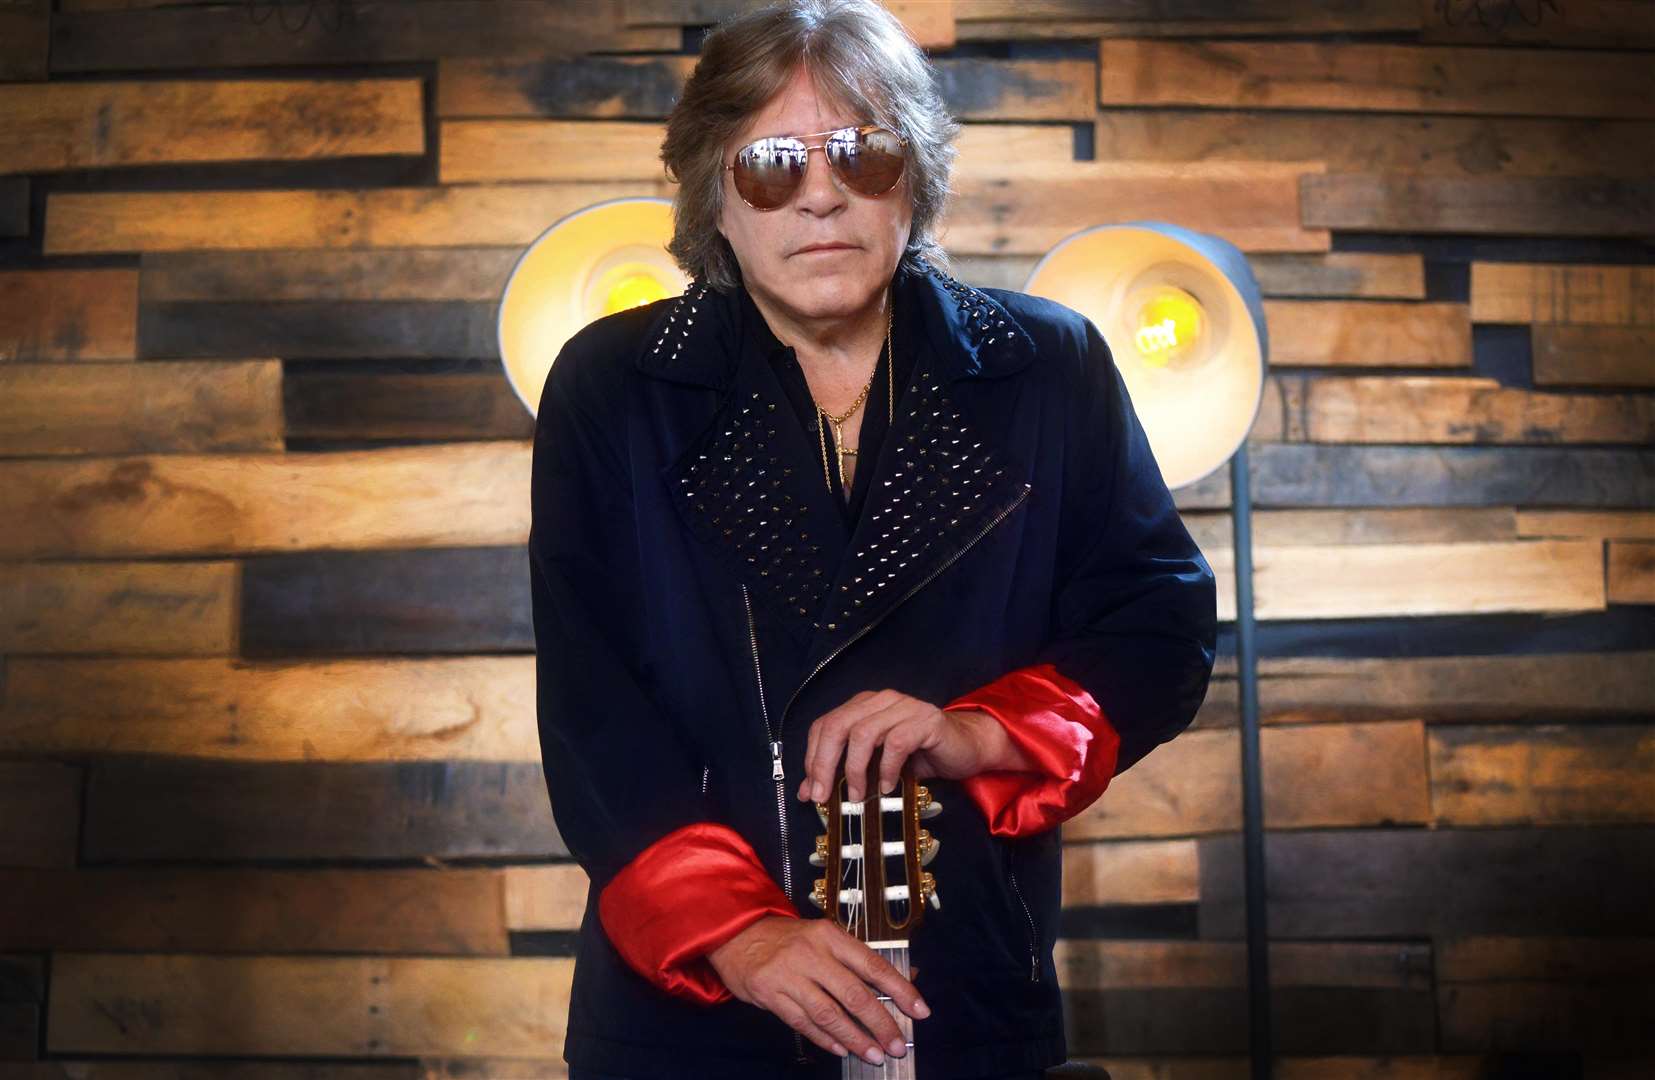 Jose Feliciano will perform at Rye